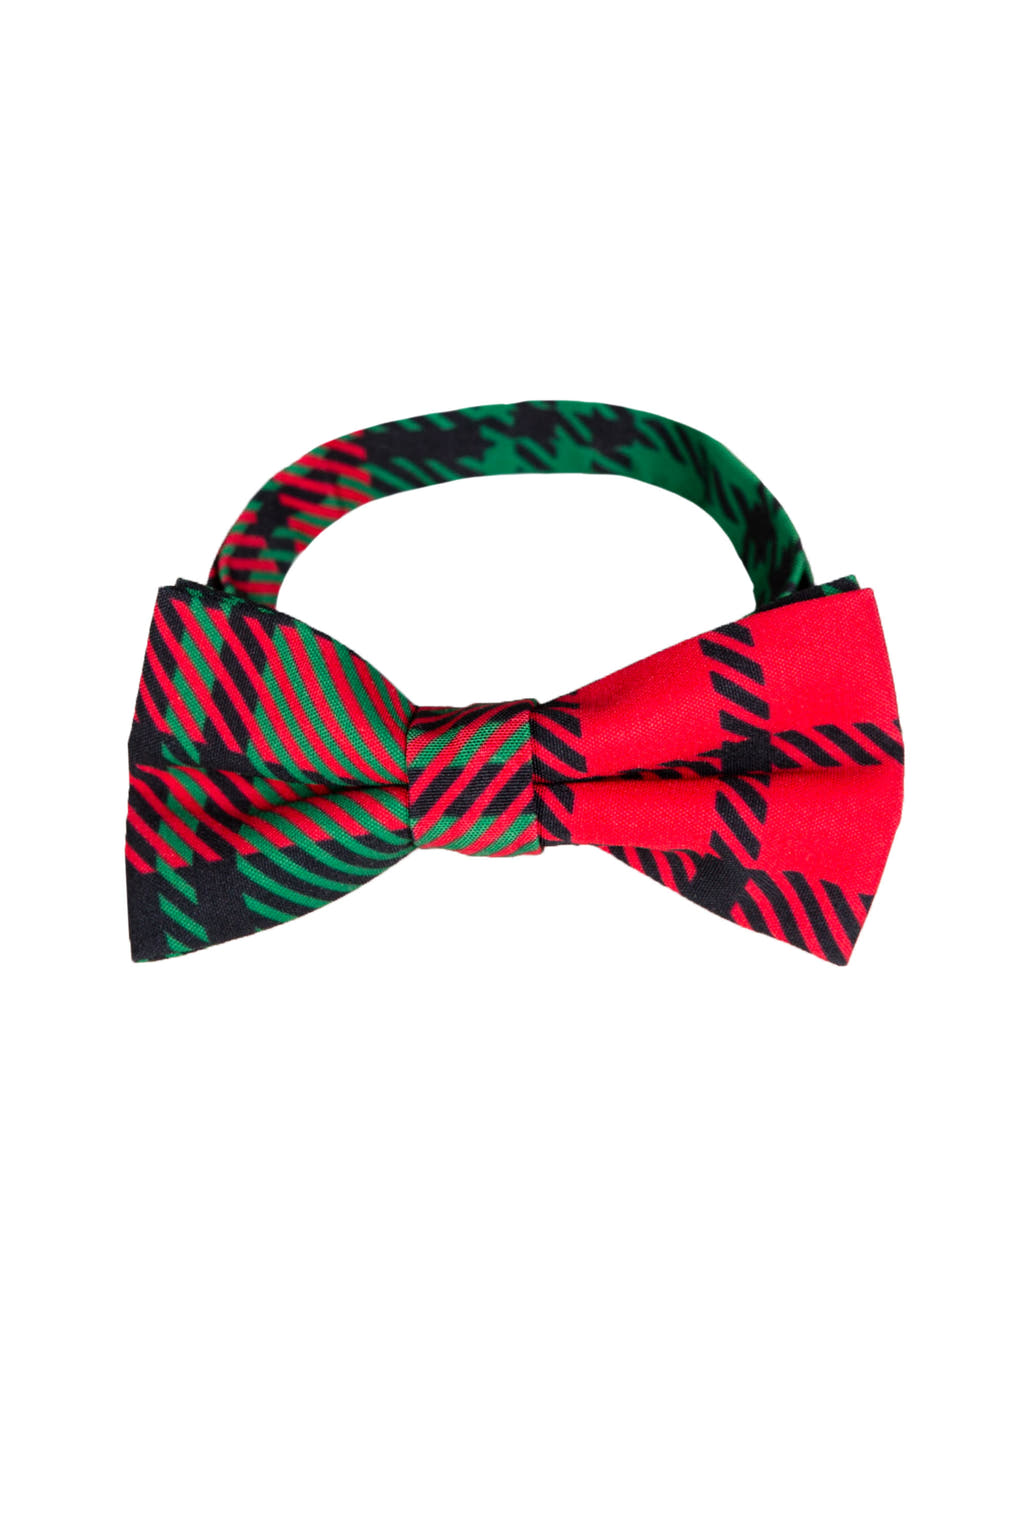 Red And Green Christmas Plaid Bow Tie